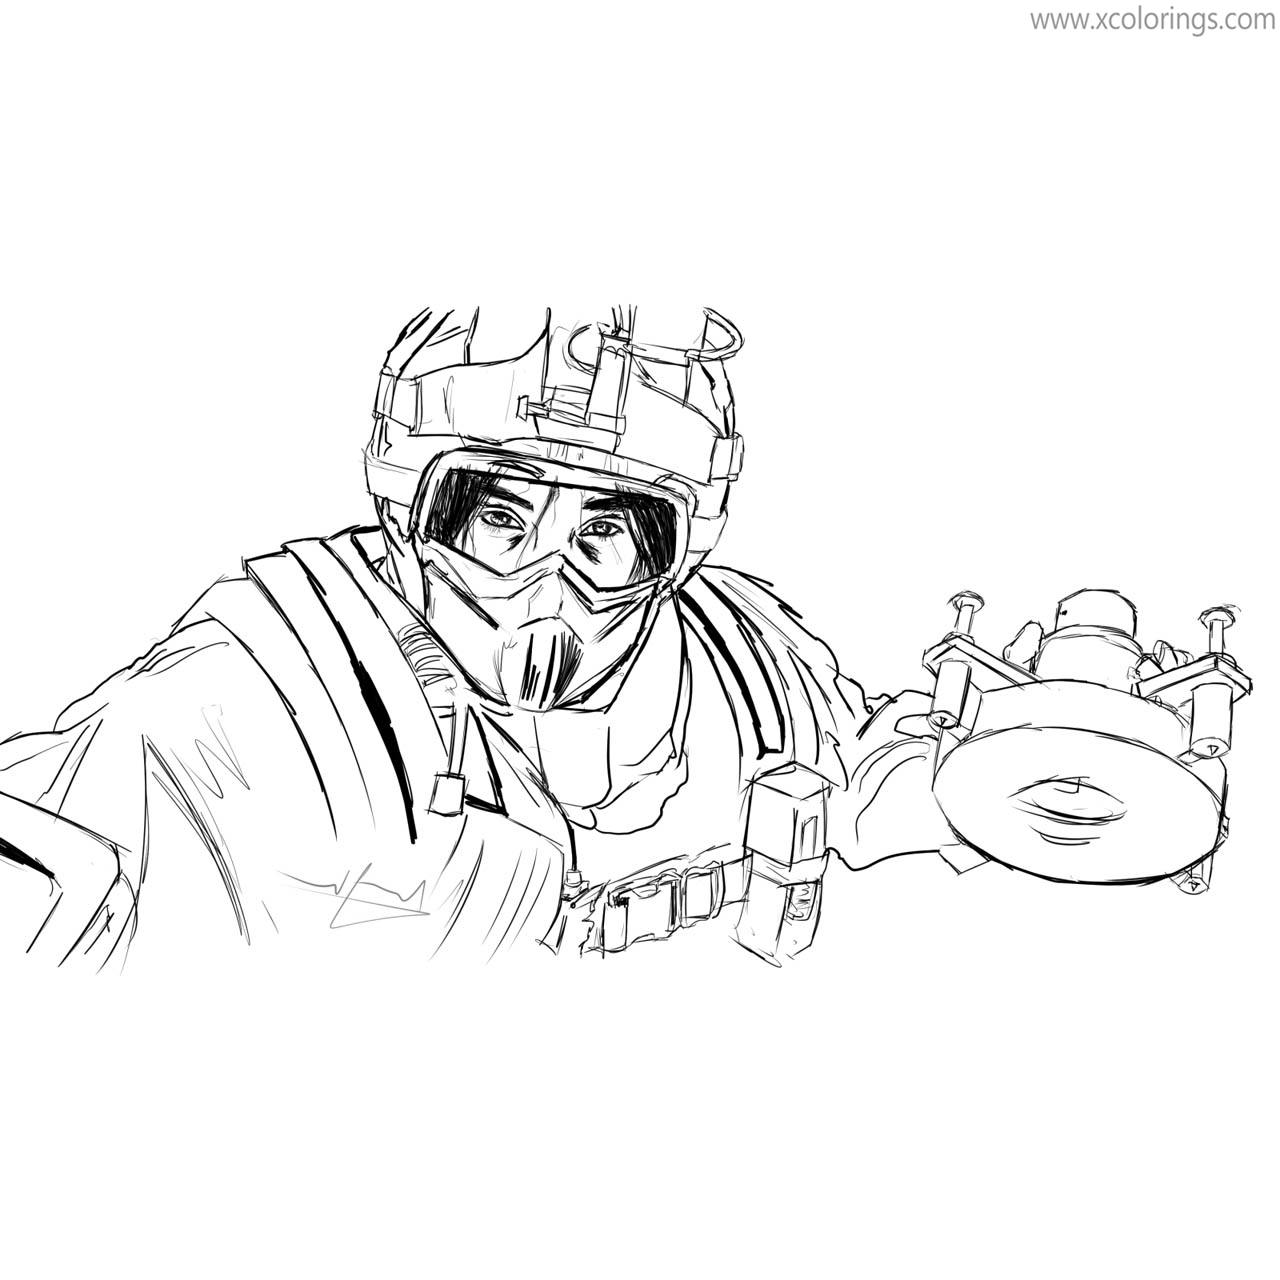 Free Rainbow Six Siege Coloring Pages Fan Artwork printable